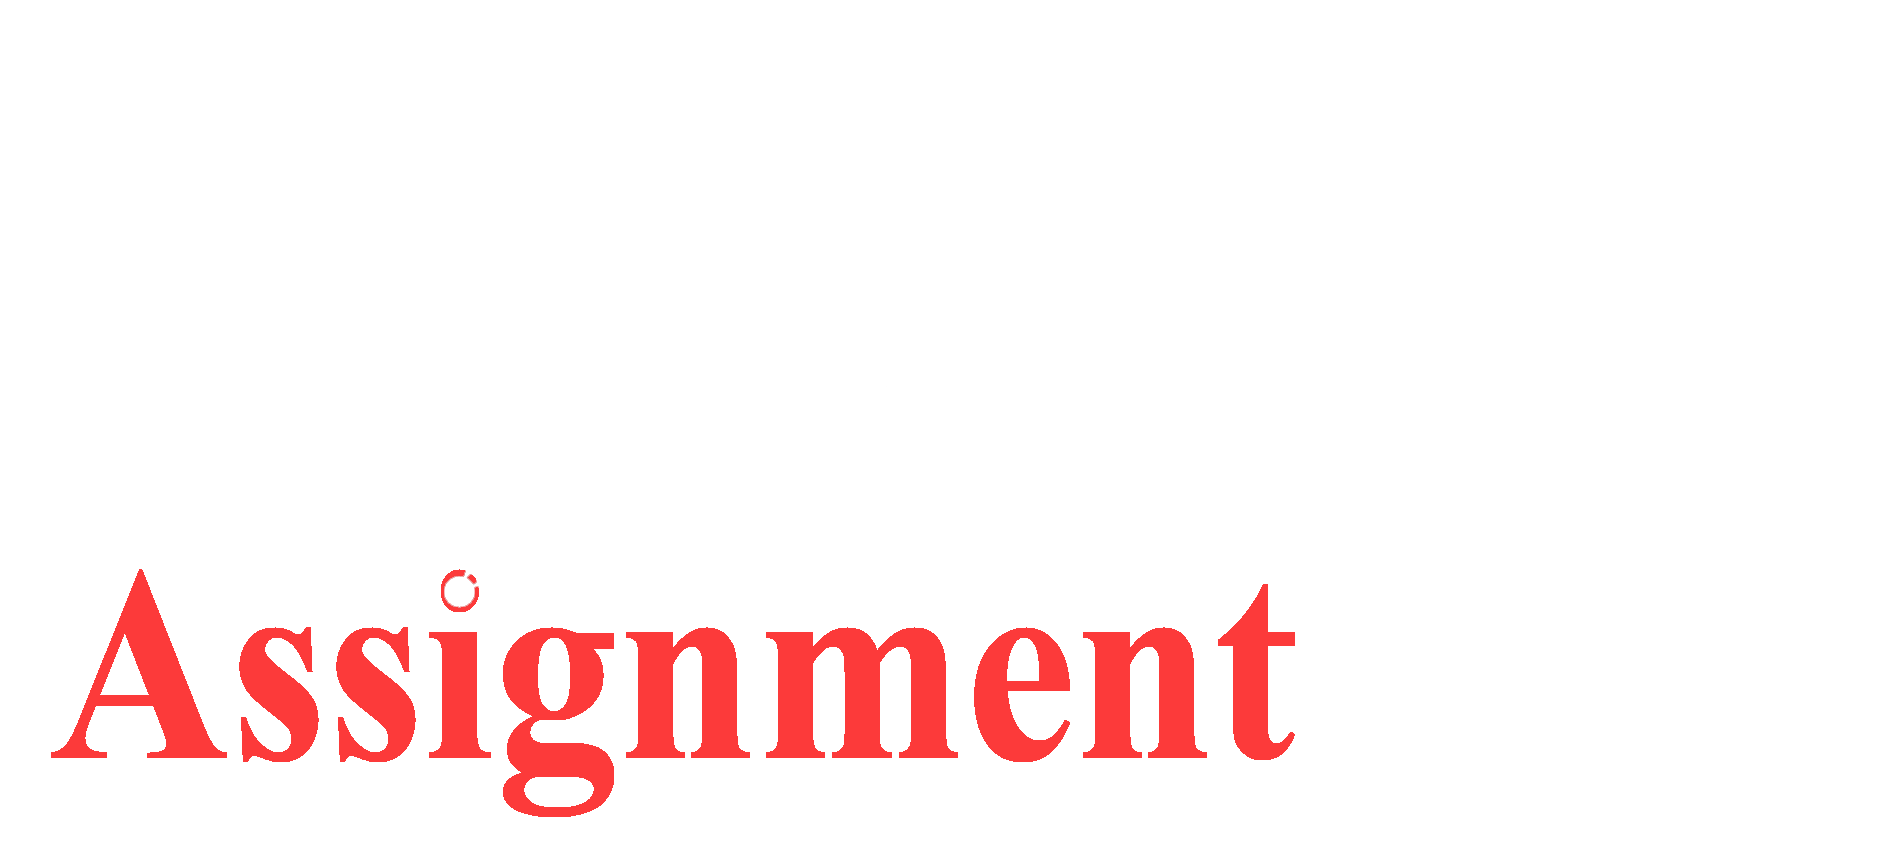 on assignment logo